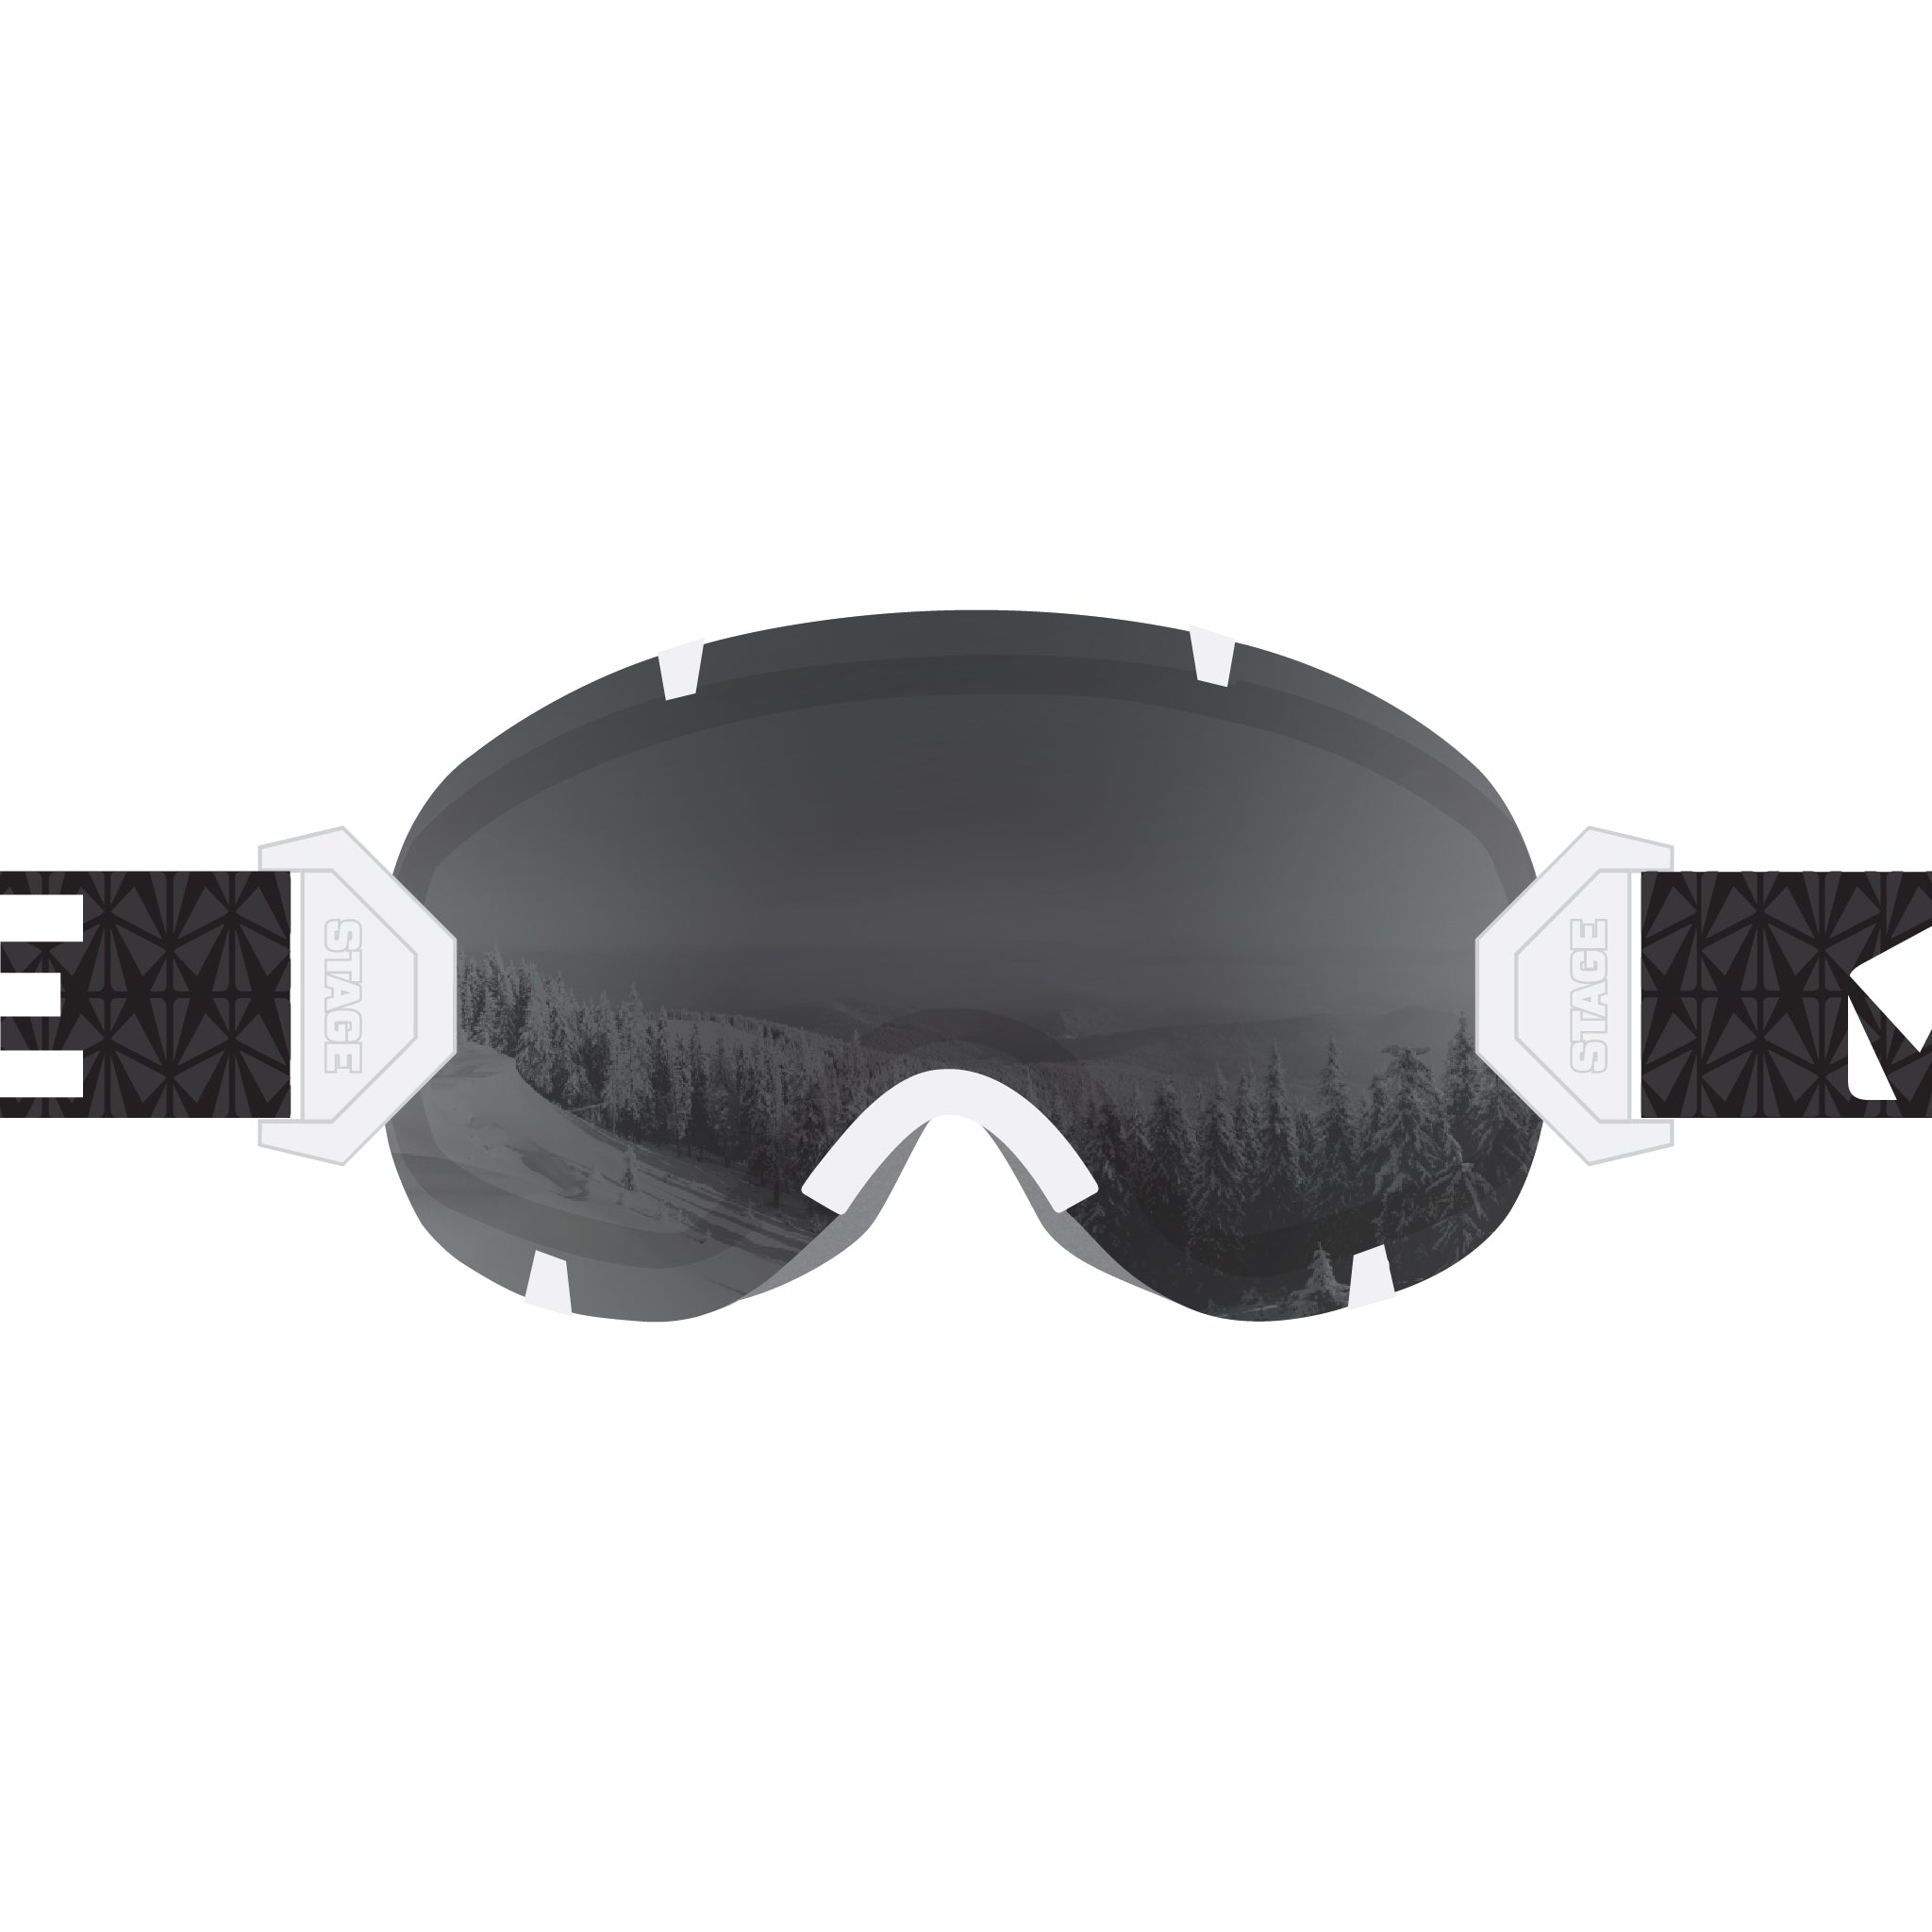 Strap and Interchangeable - Ski - STAGE Lens Stunt Black Goggle